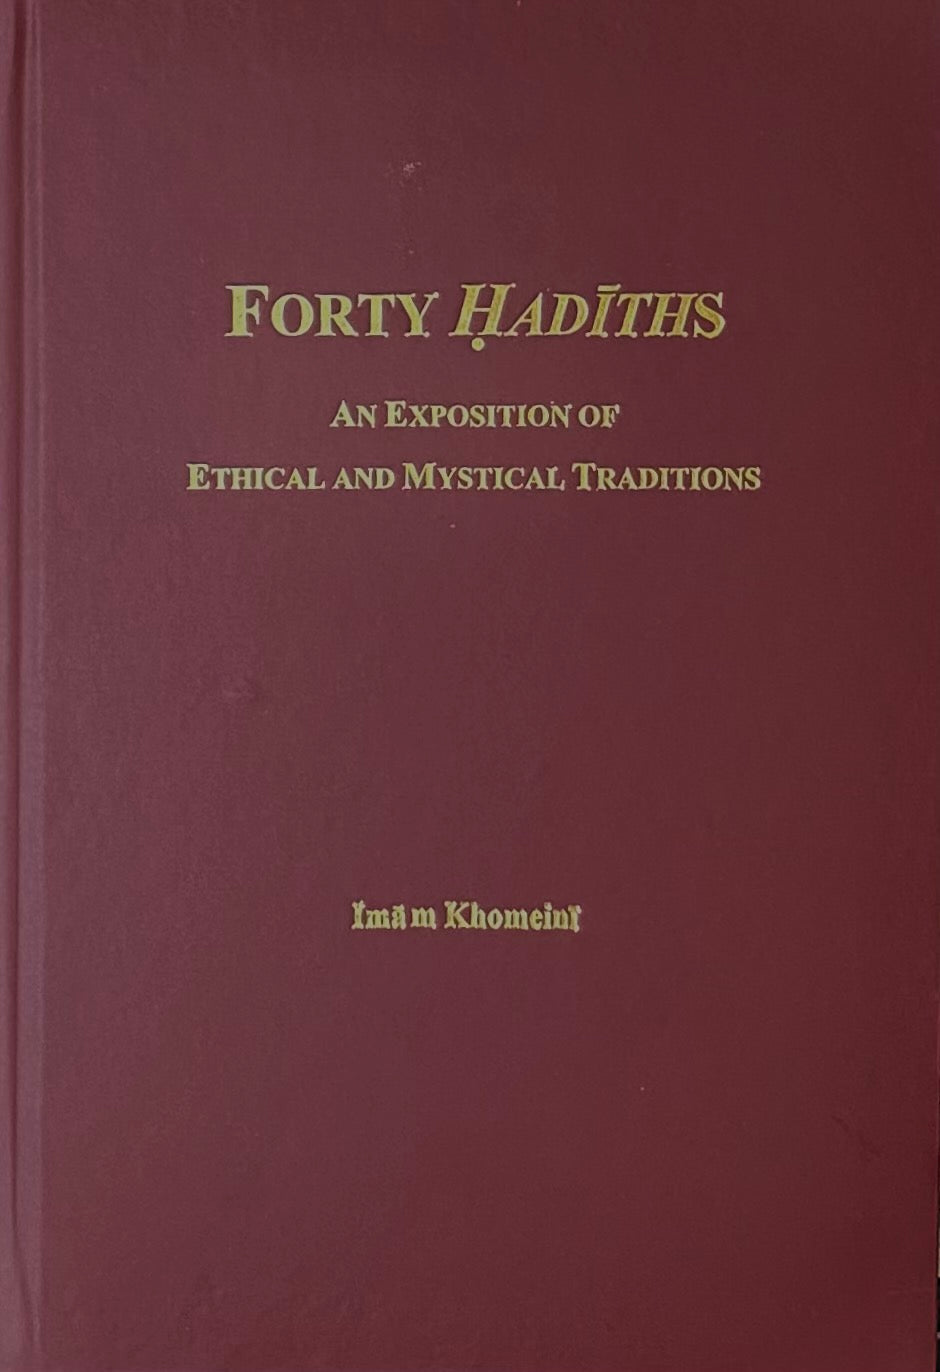 Forty Hadiths by Imam Khomeini